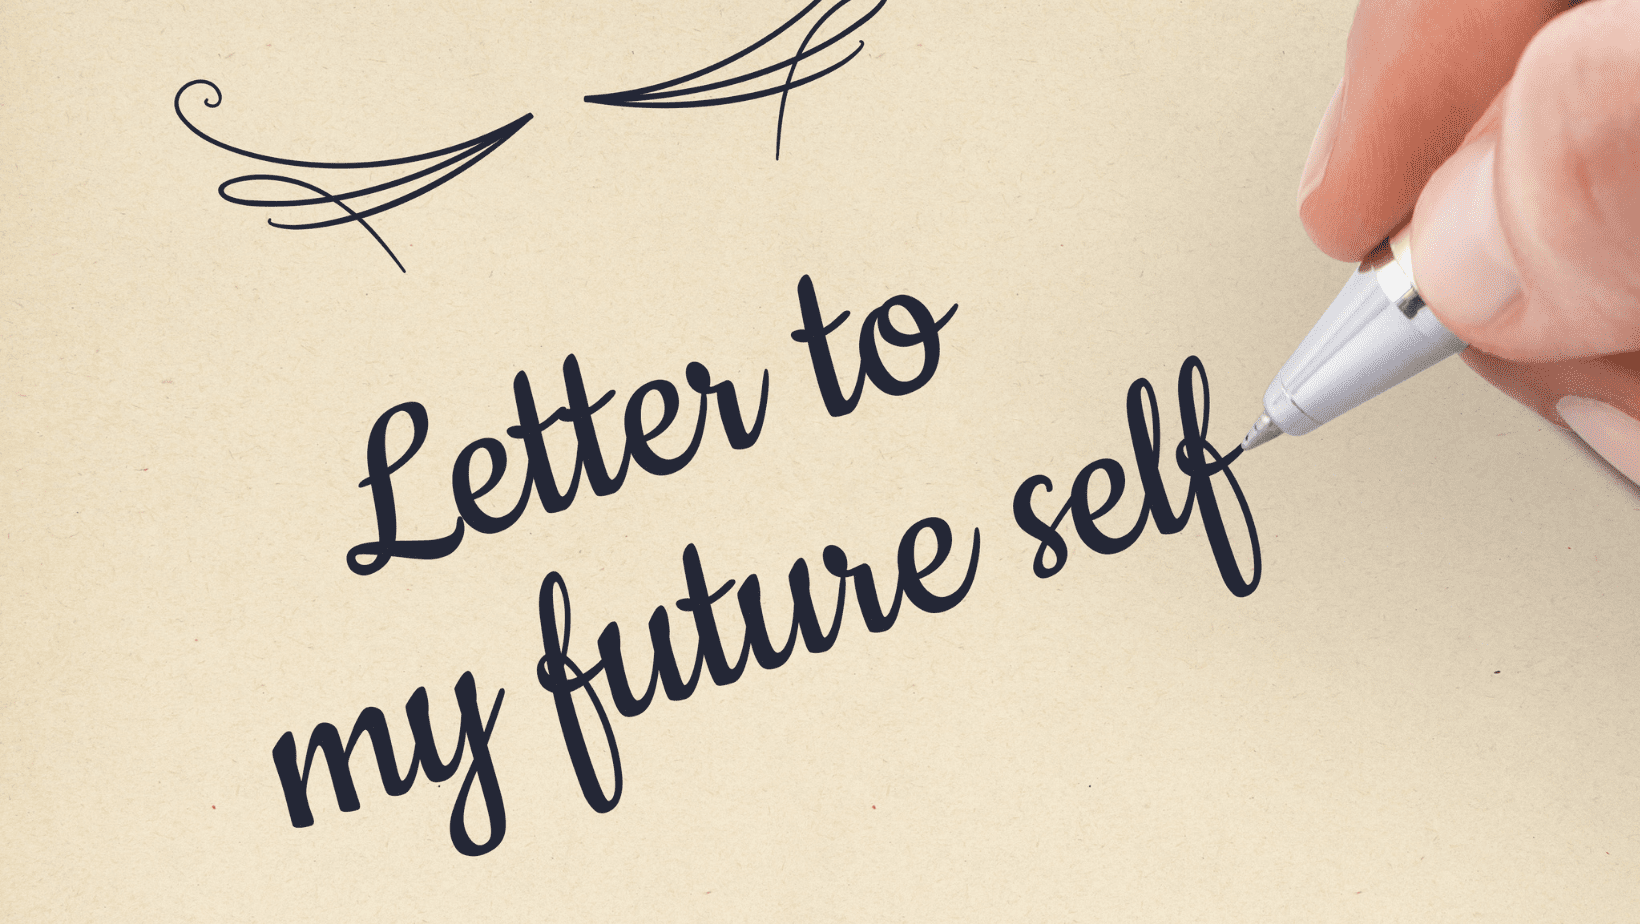 A Letter To My Future Self By Veer Kohli Os me